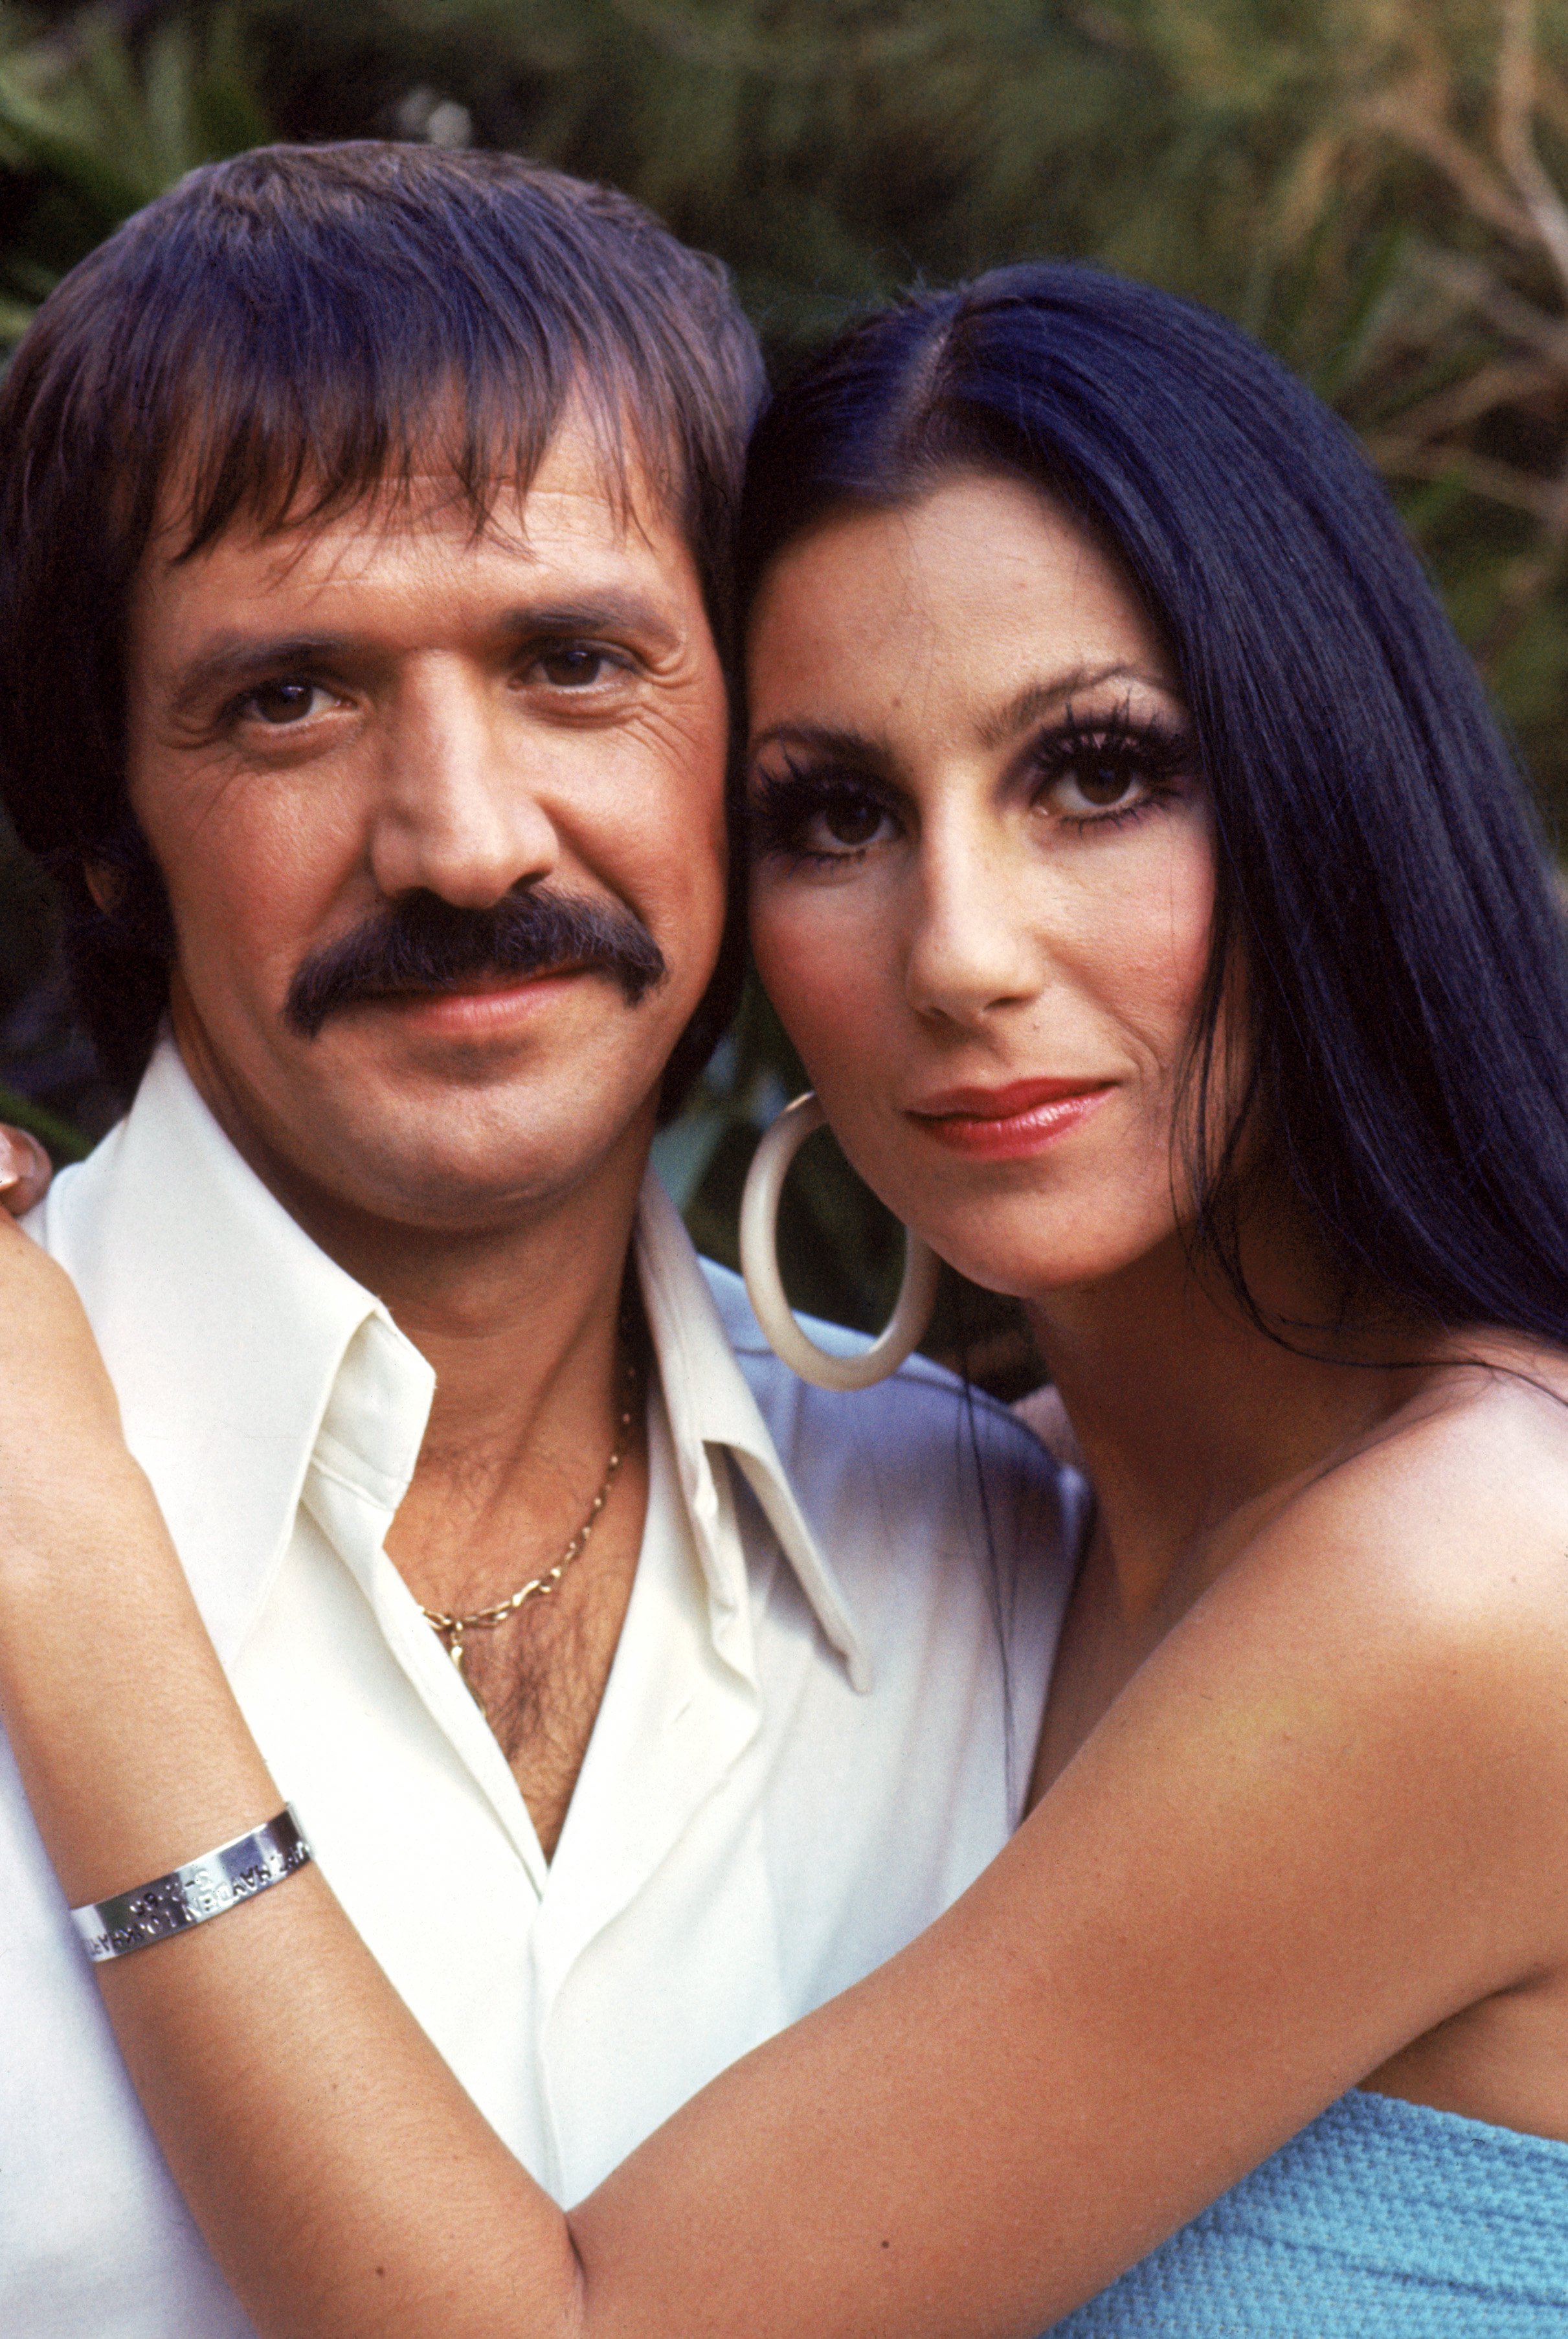 Cher and Sonny Bono pose for a promotional photo for "The Sonny and Cher Show" in 1970 | Photo: Getty Images